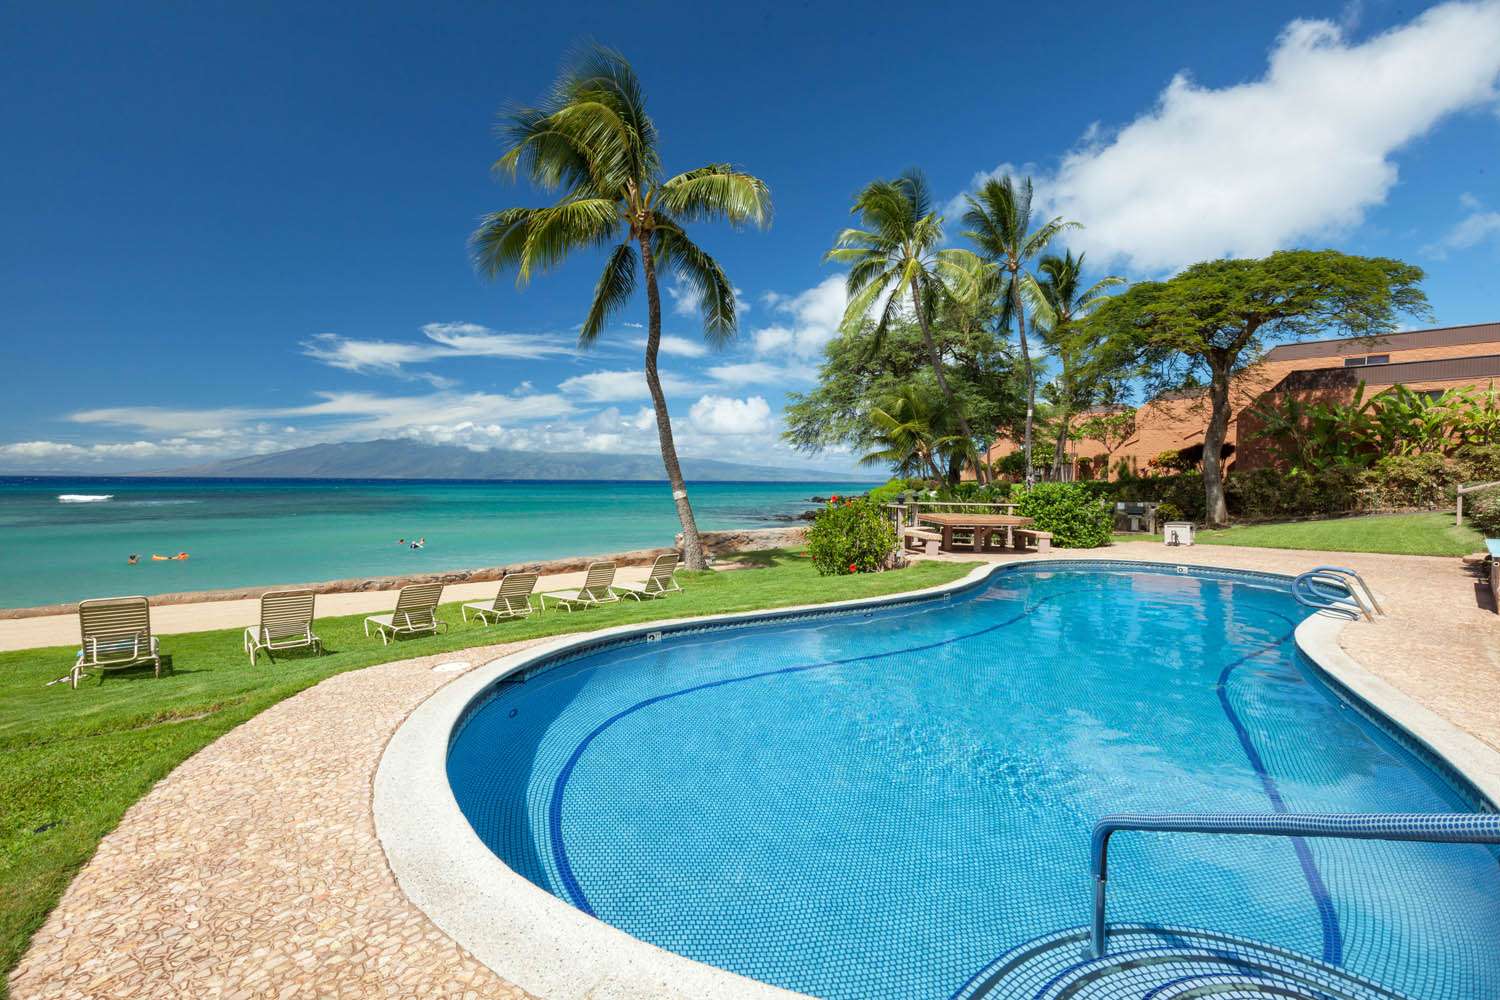 About the Oceanfront Maui Condo Vacation Rental in Lahaina